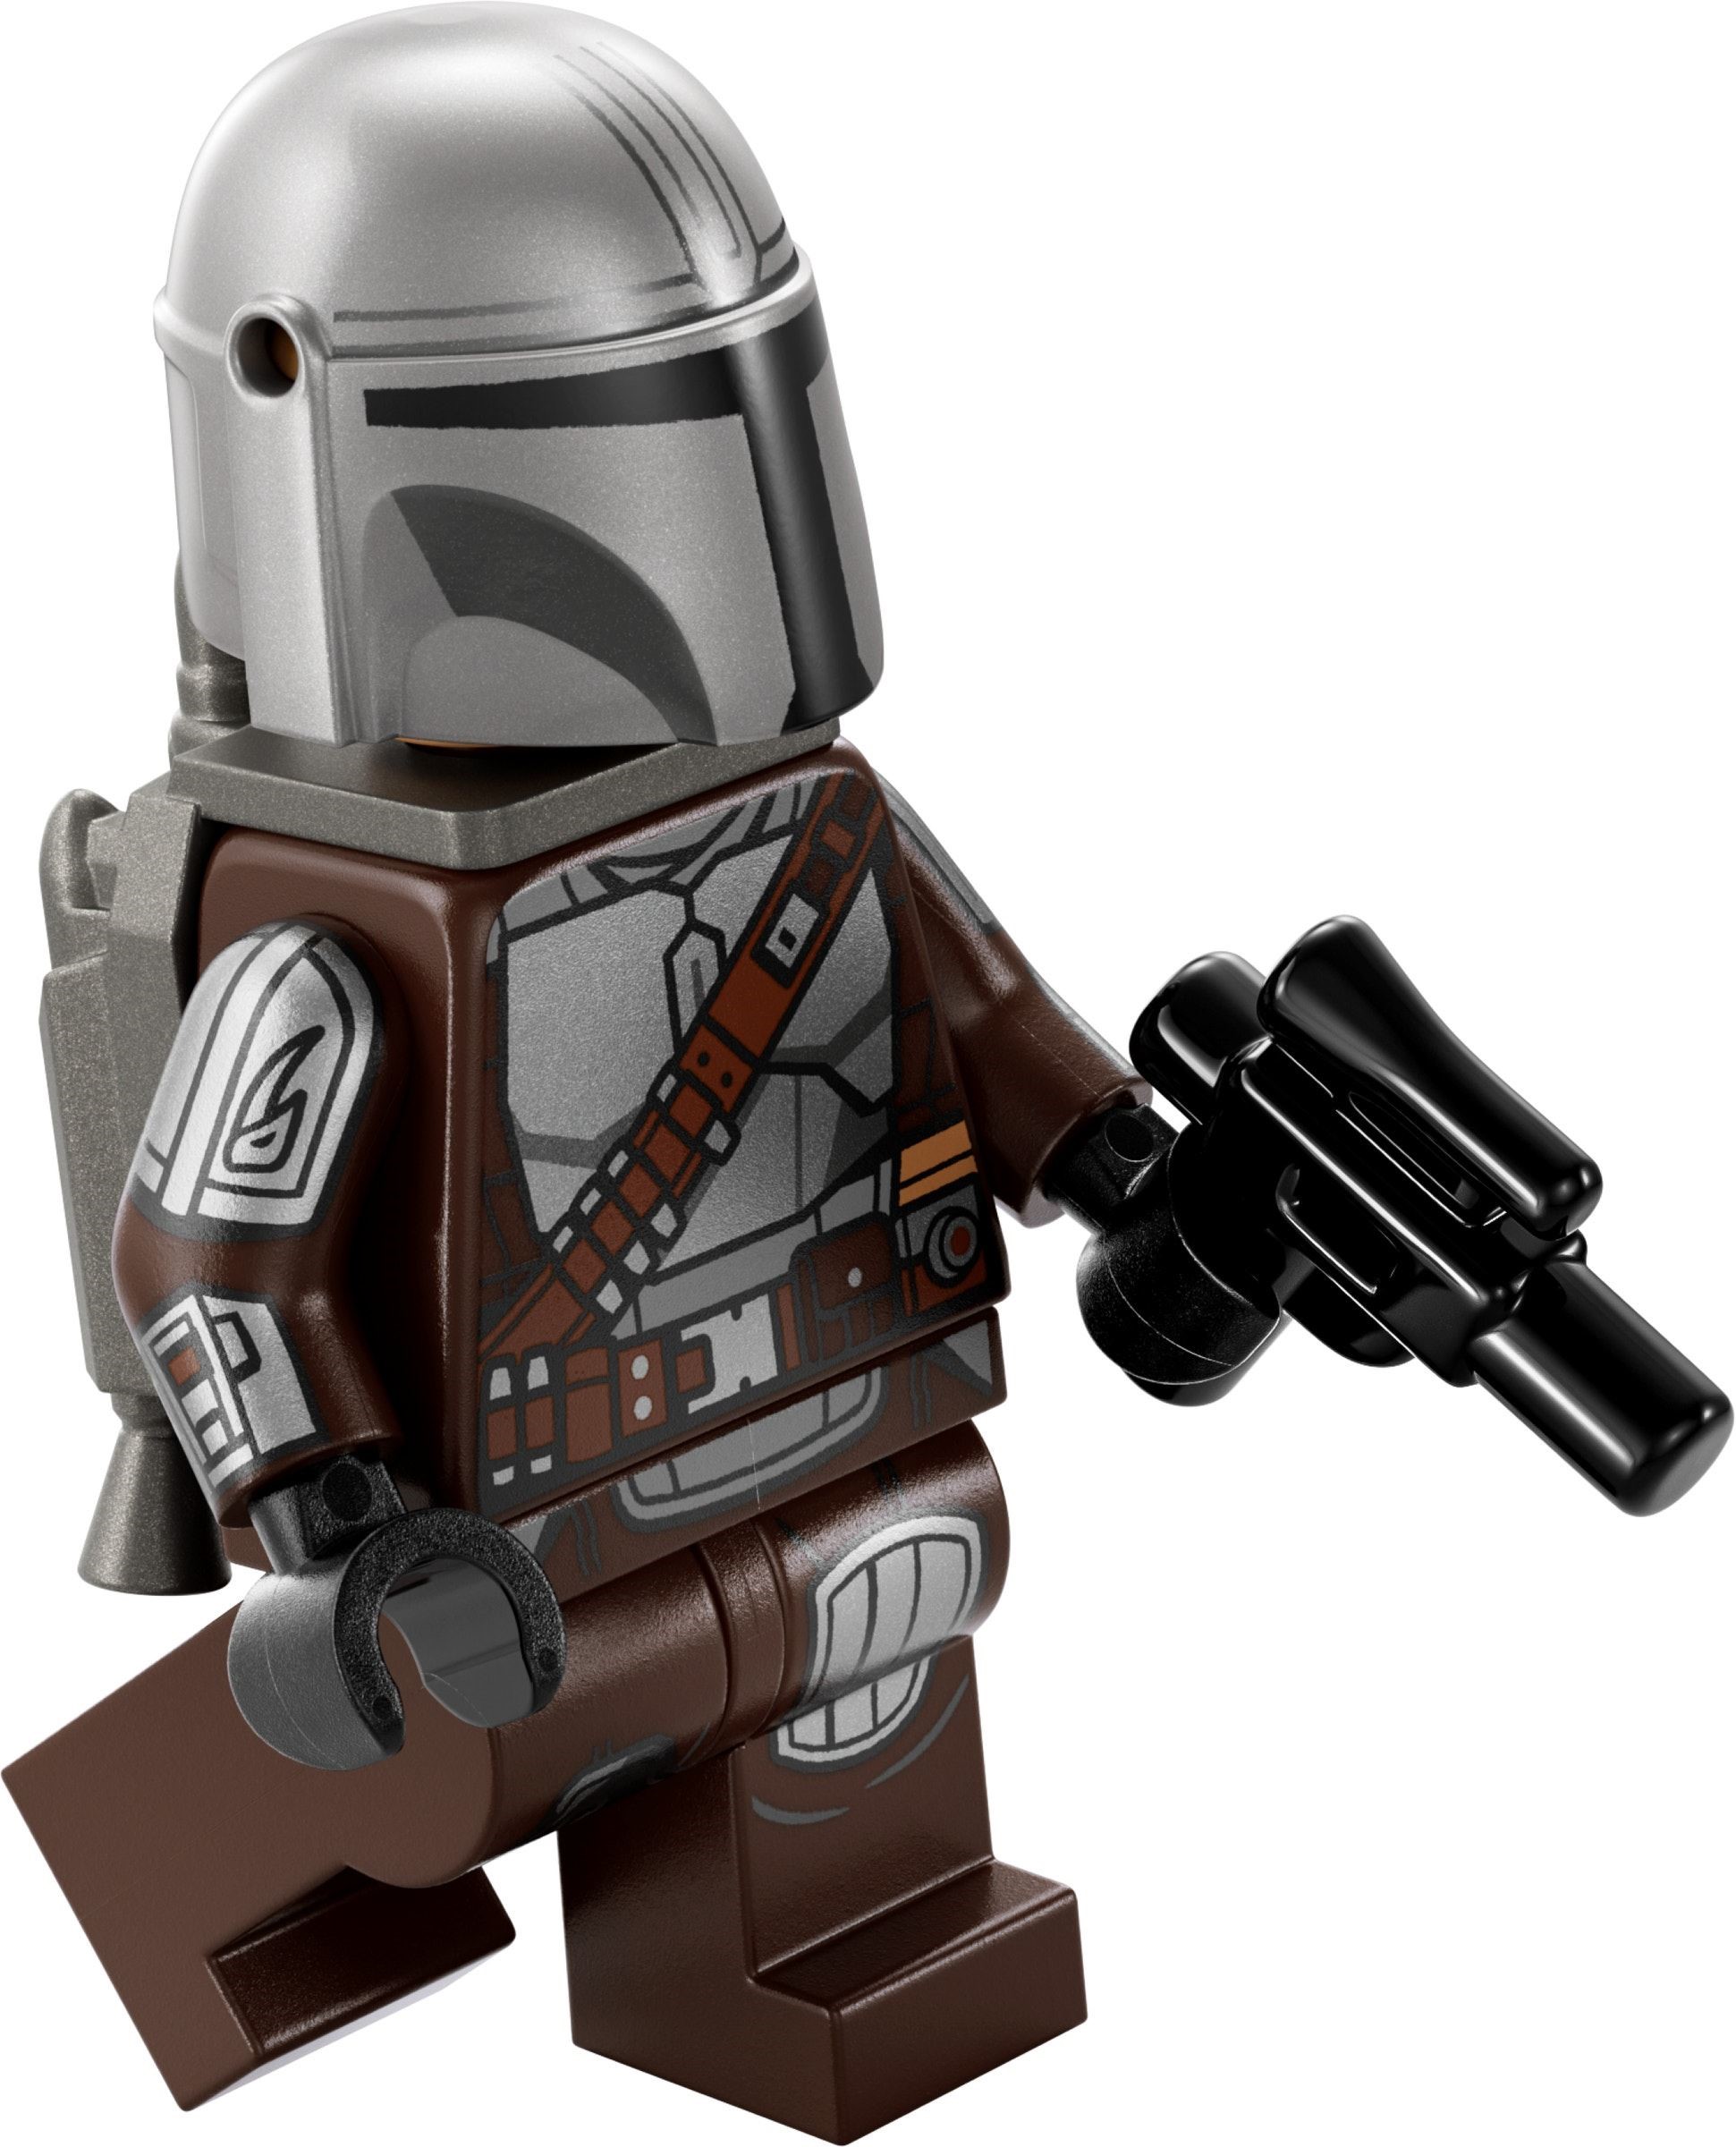 The Mandalorian ep.8, Lego mocan pther view of it ! - LEGO